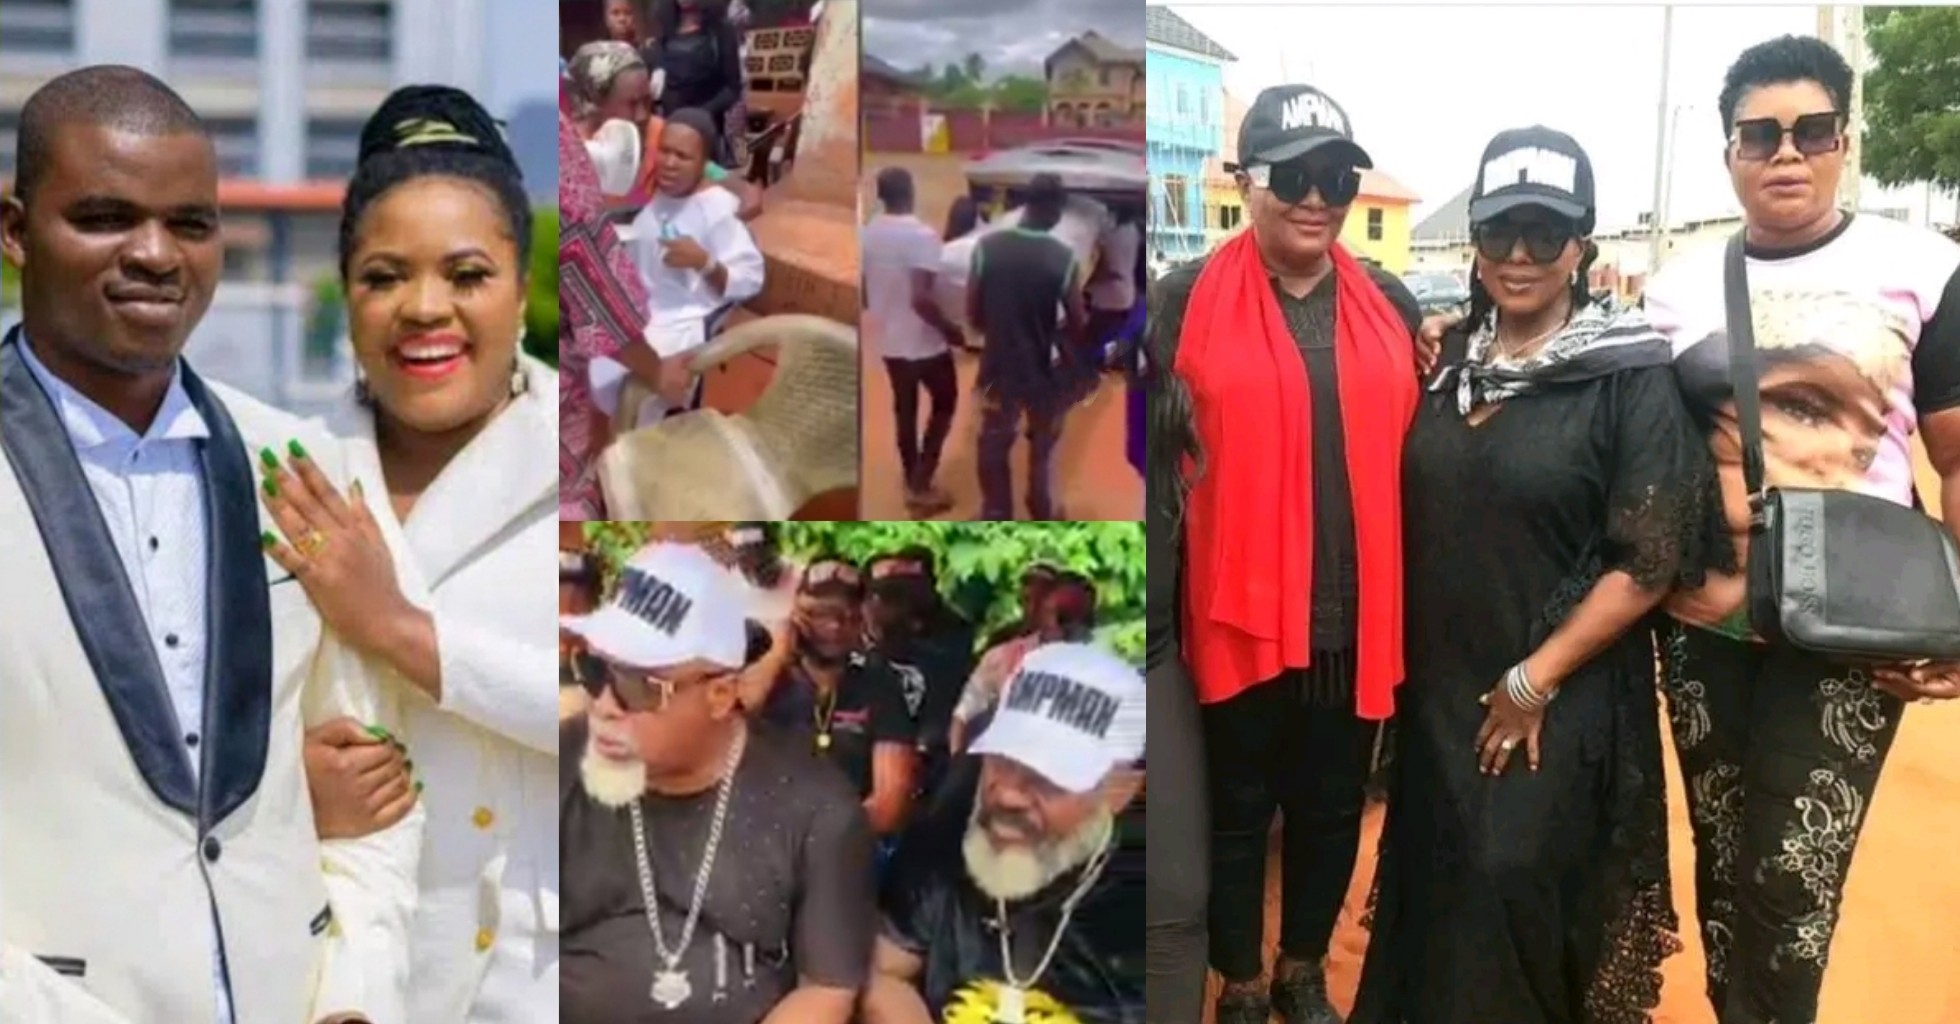 Rita Edochie, Ebele Okaro, Harry B, others attend funeral of Chioma Anosike’s hubby, Kingsley